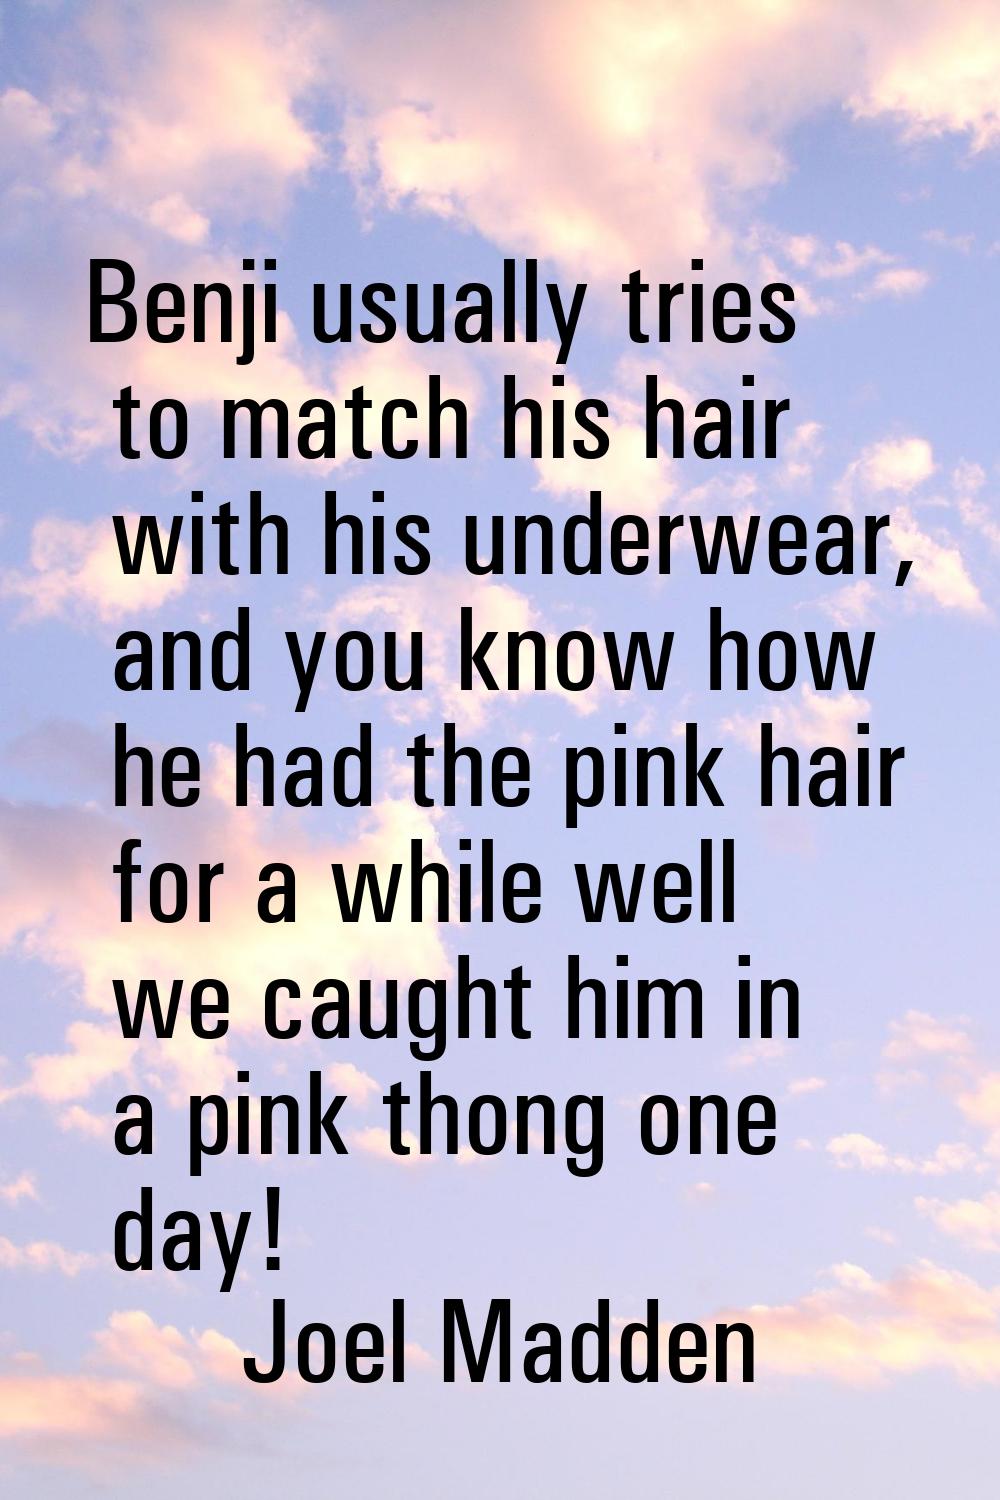 Benji usually tries to match his hair with his underwear, and you know how he had the pink hair for